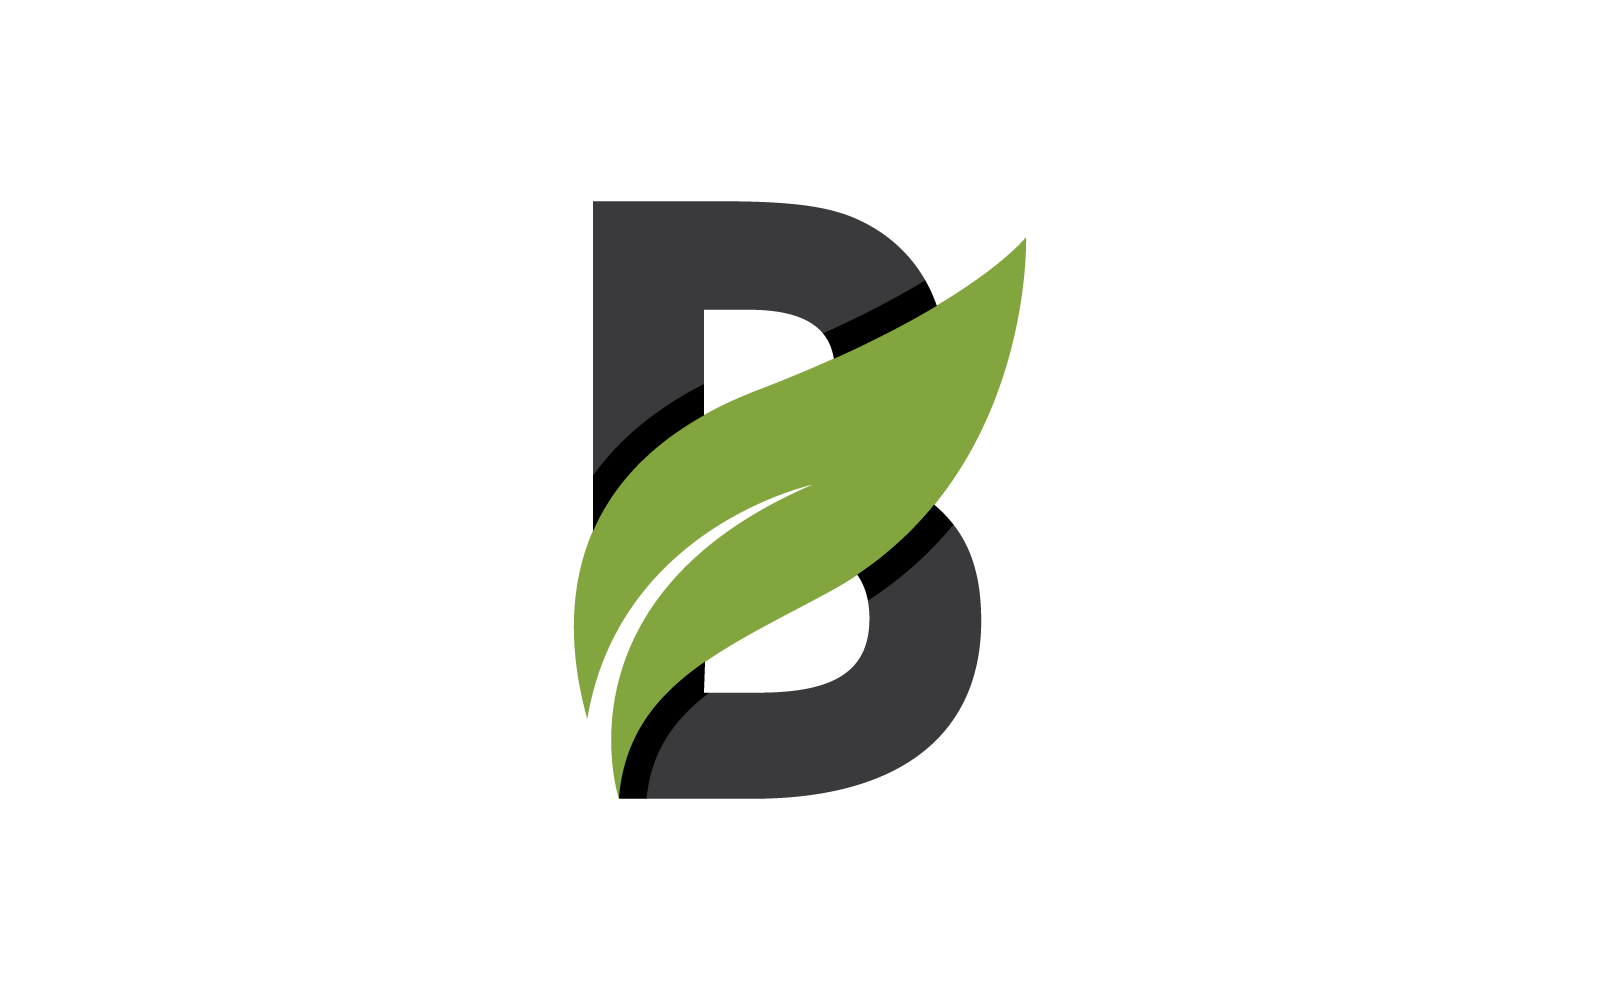 B Initial letter with green leaf